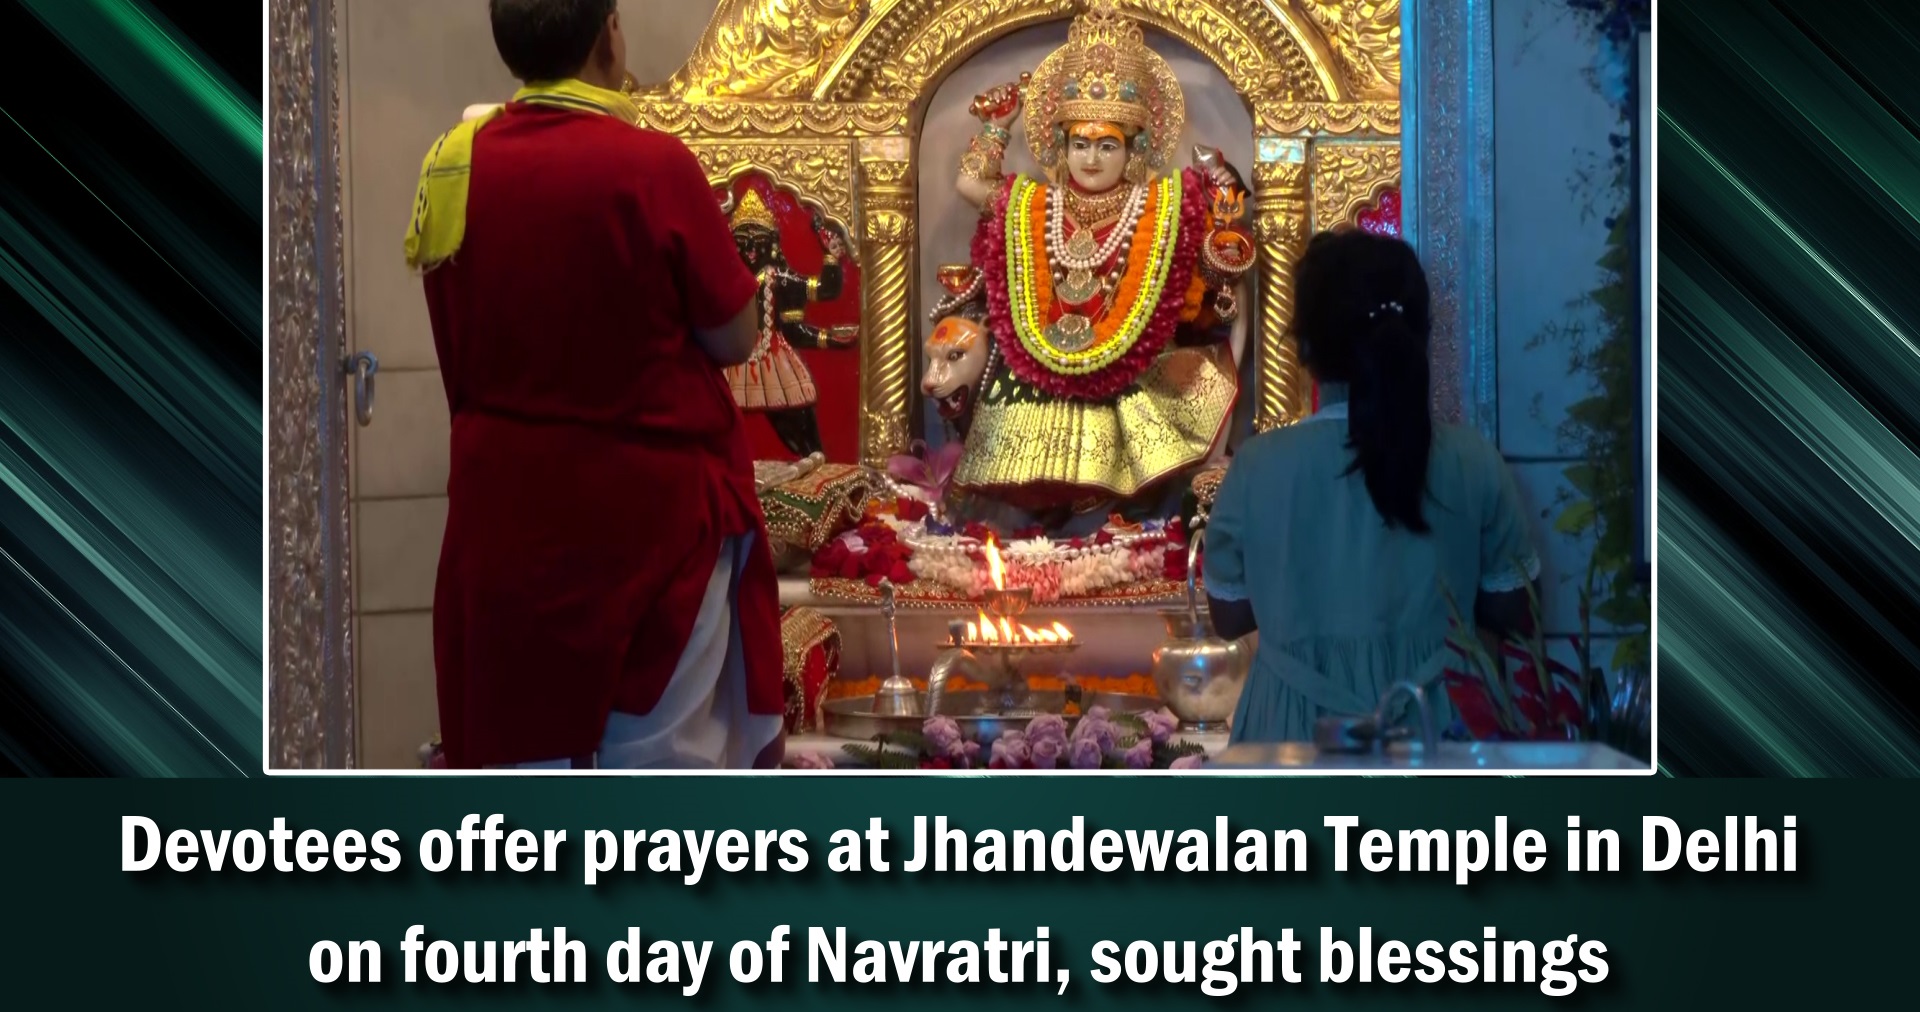 Devotees offer prayers at Jhandewalan Temple in Delhi on fourth day of Navratri, sought blessings